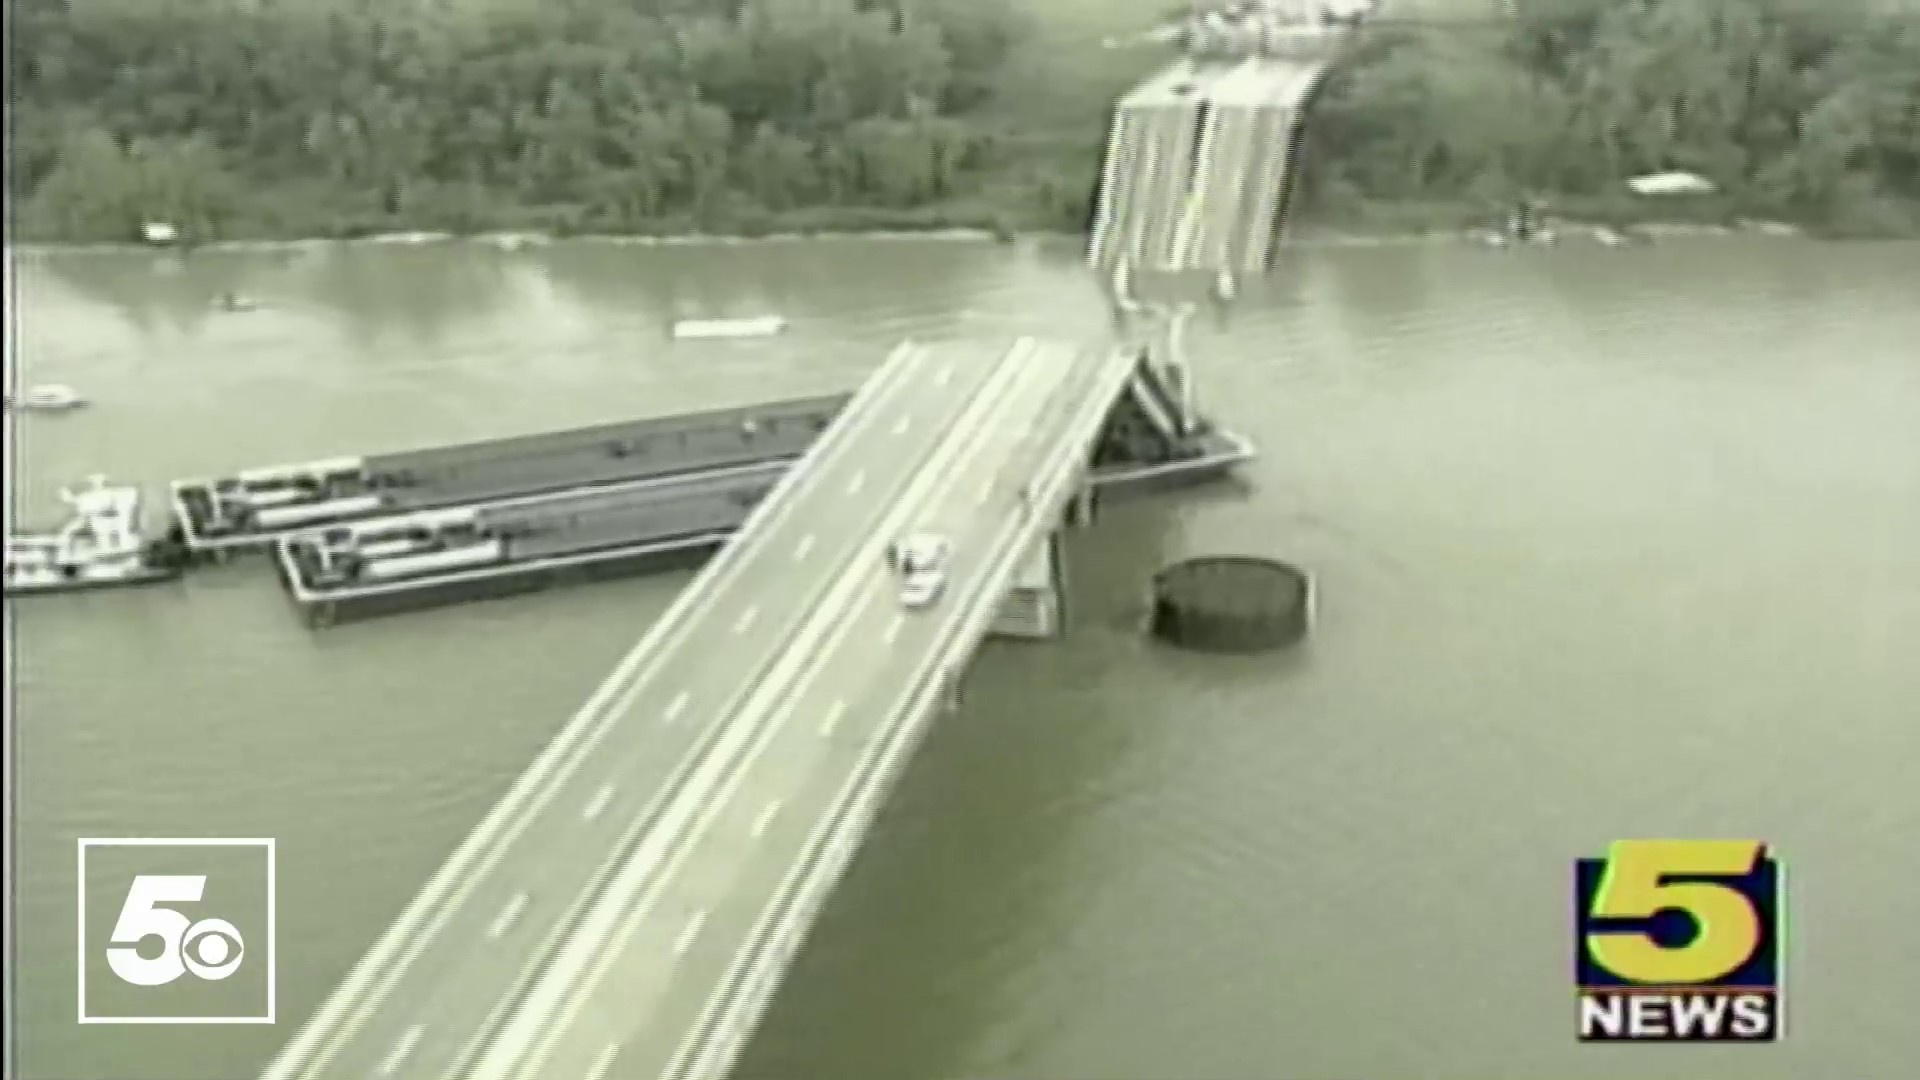 In 2002, the I-40 Bridge across the Arkansas River near Webbers Falls was hit by a barge and collapsed.